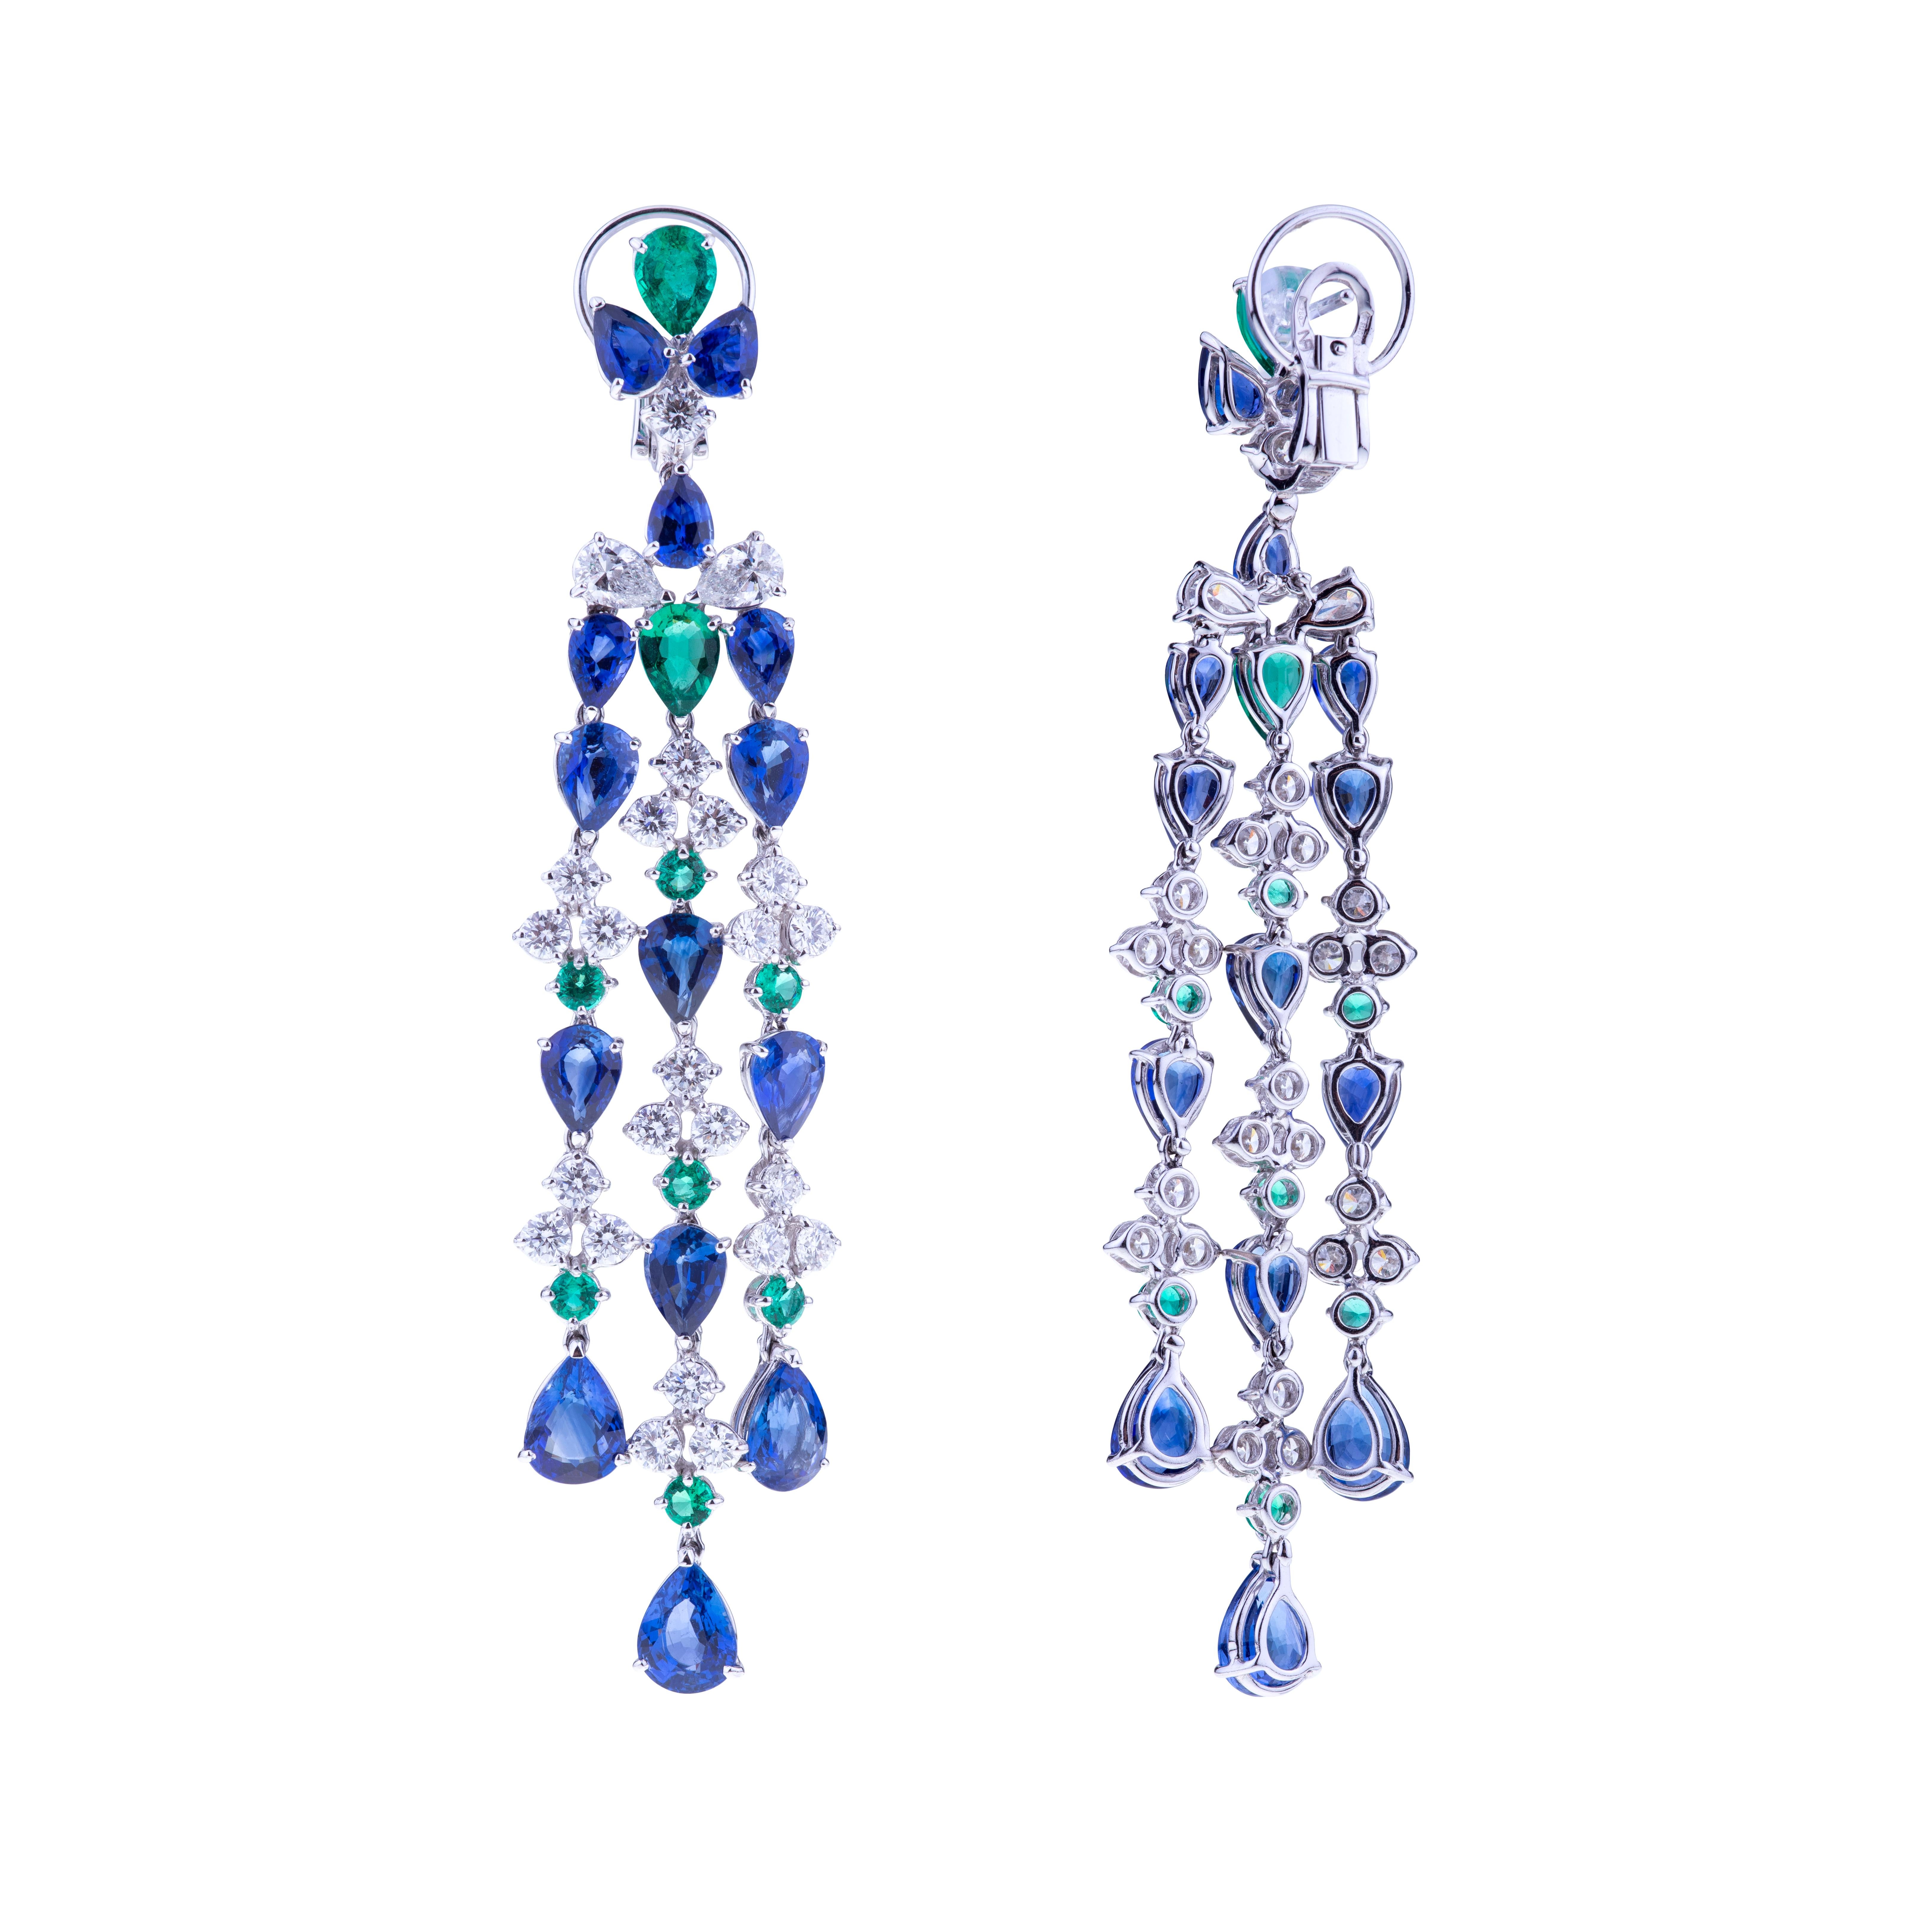 Chandelier Earrings with Blue Sapphires, Emeralds and Diamonds with White Gold. 
Stones are set on a Chandelier Earrings with three Threads of Sapphires, Emeralds and Diamonds. The Sapphires weight is altogether 22.12 carats, mounted in white gold